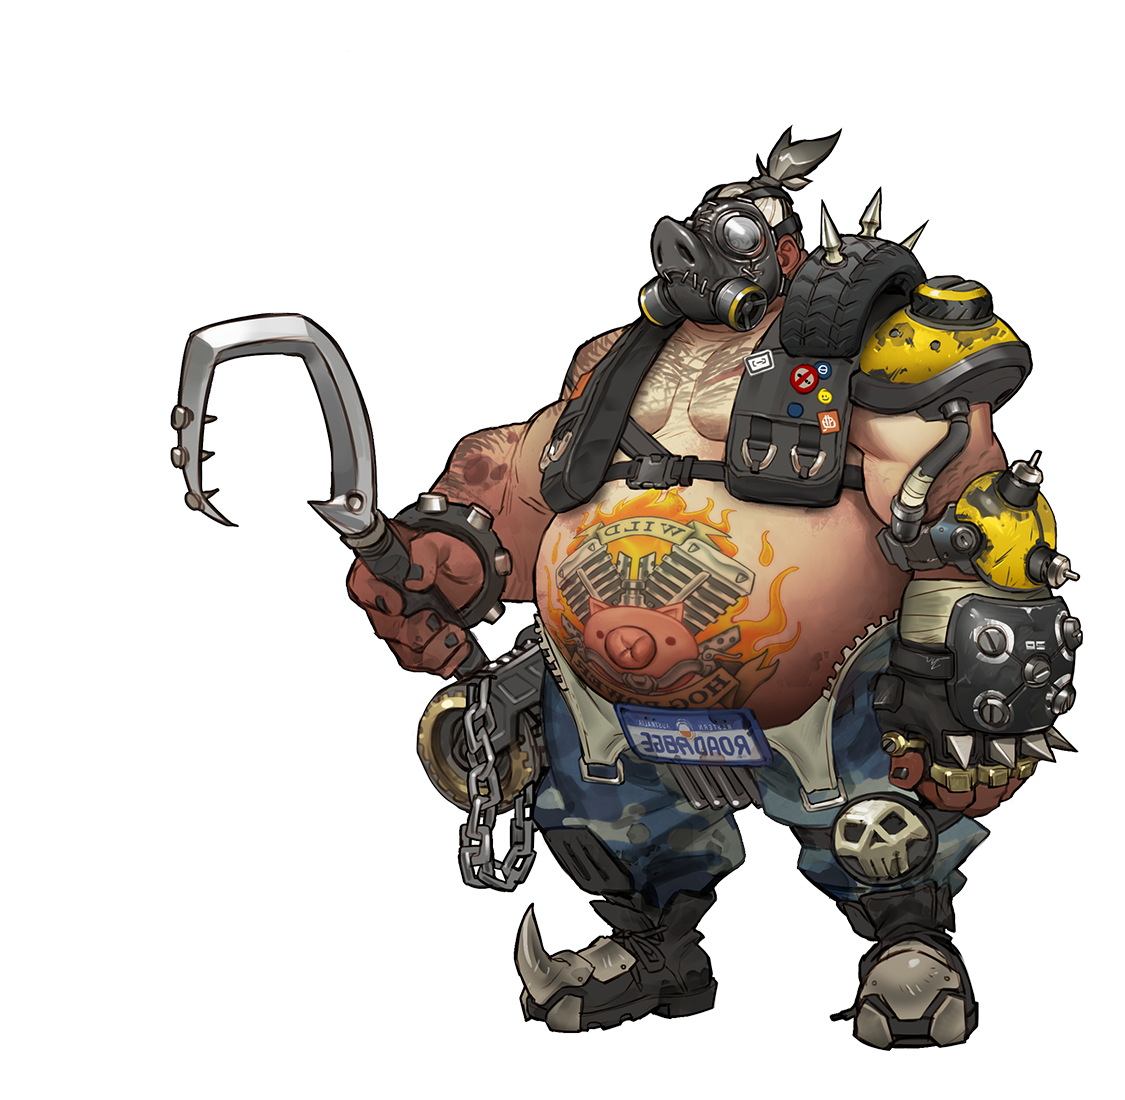  for free download. Overwatch roadhog png